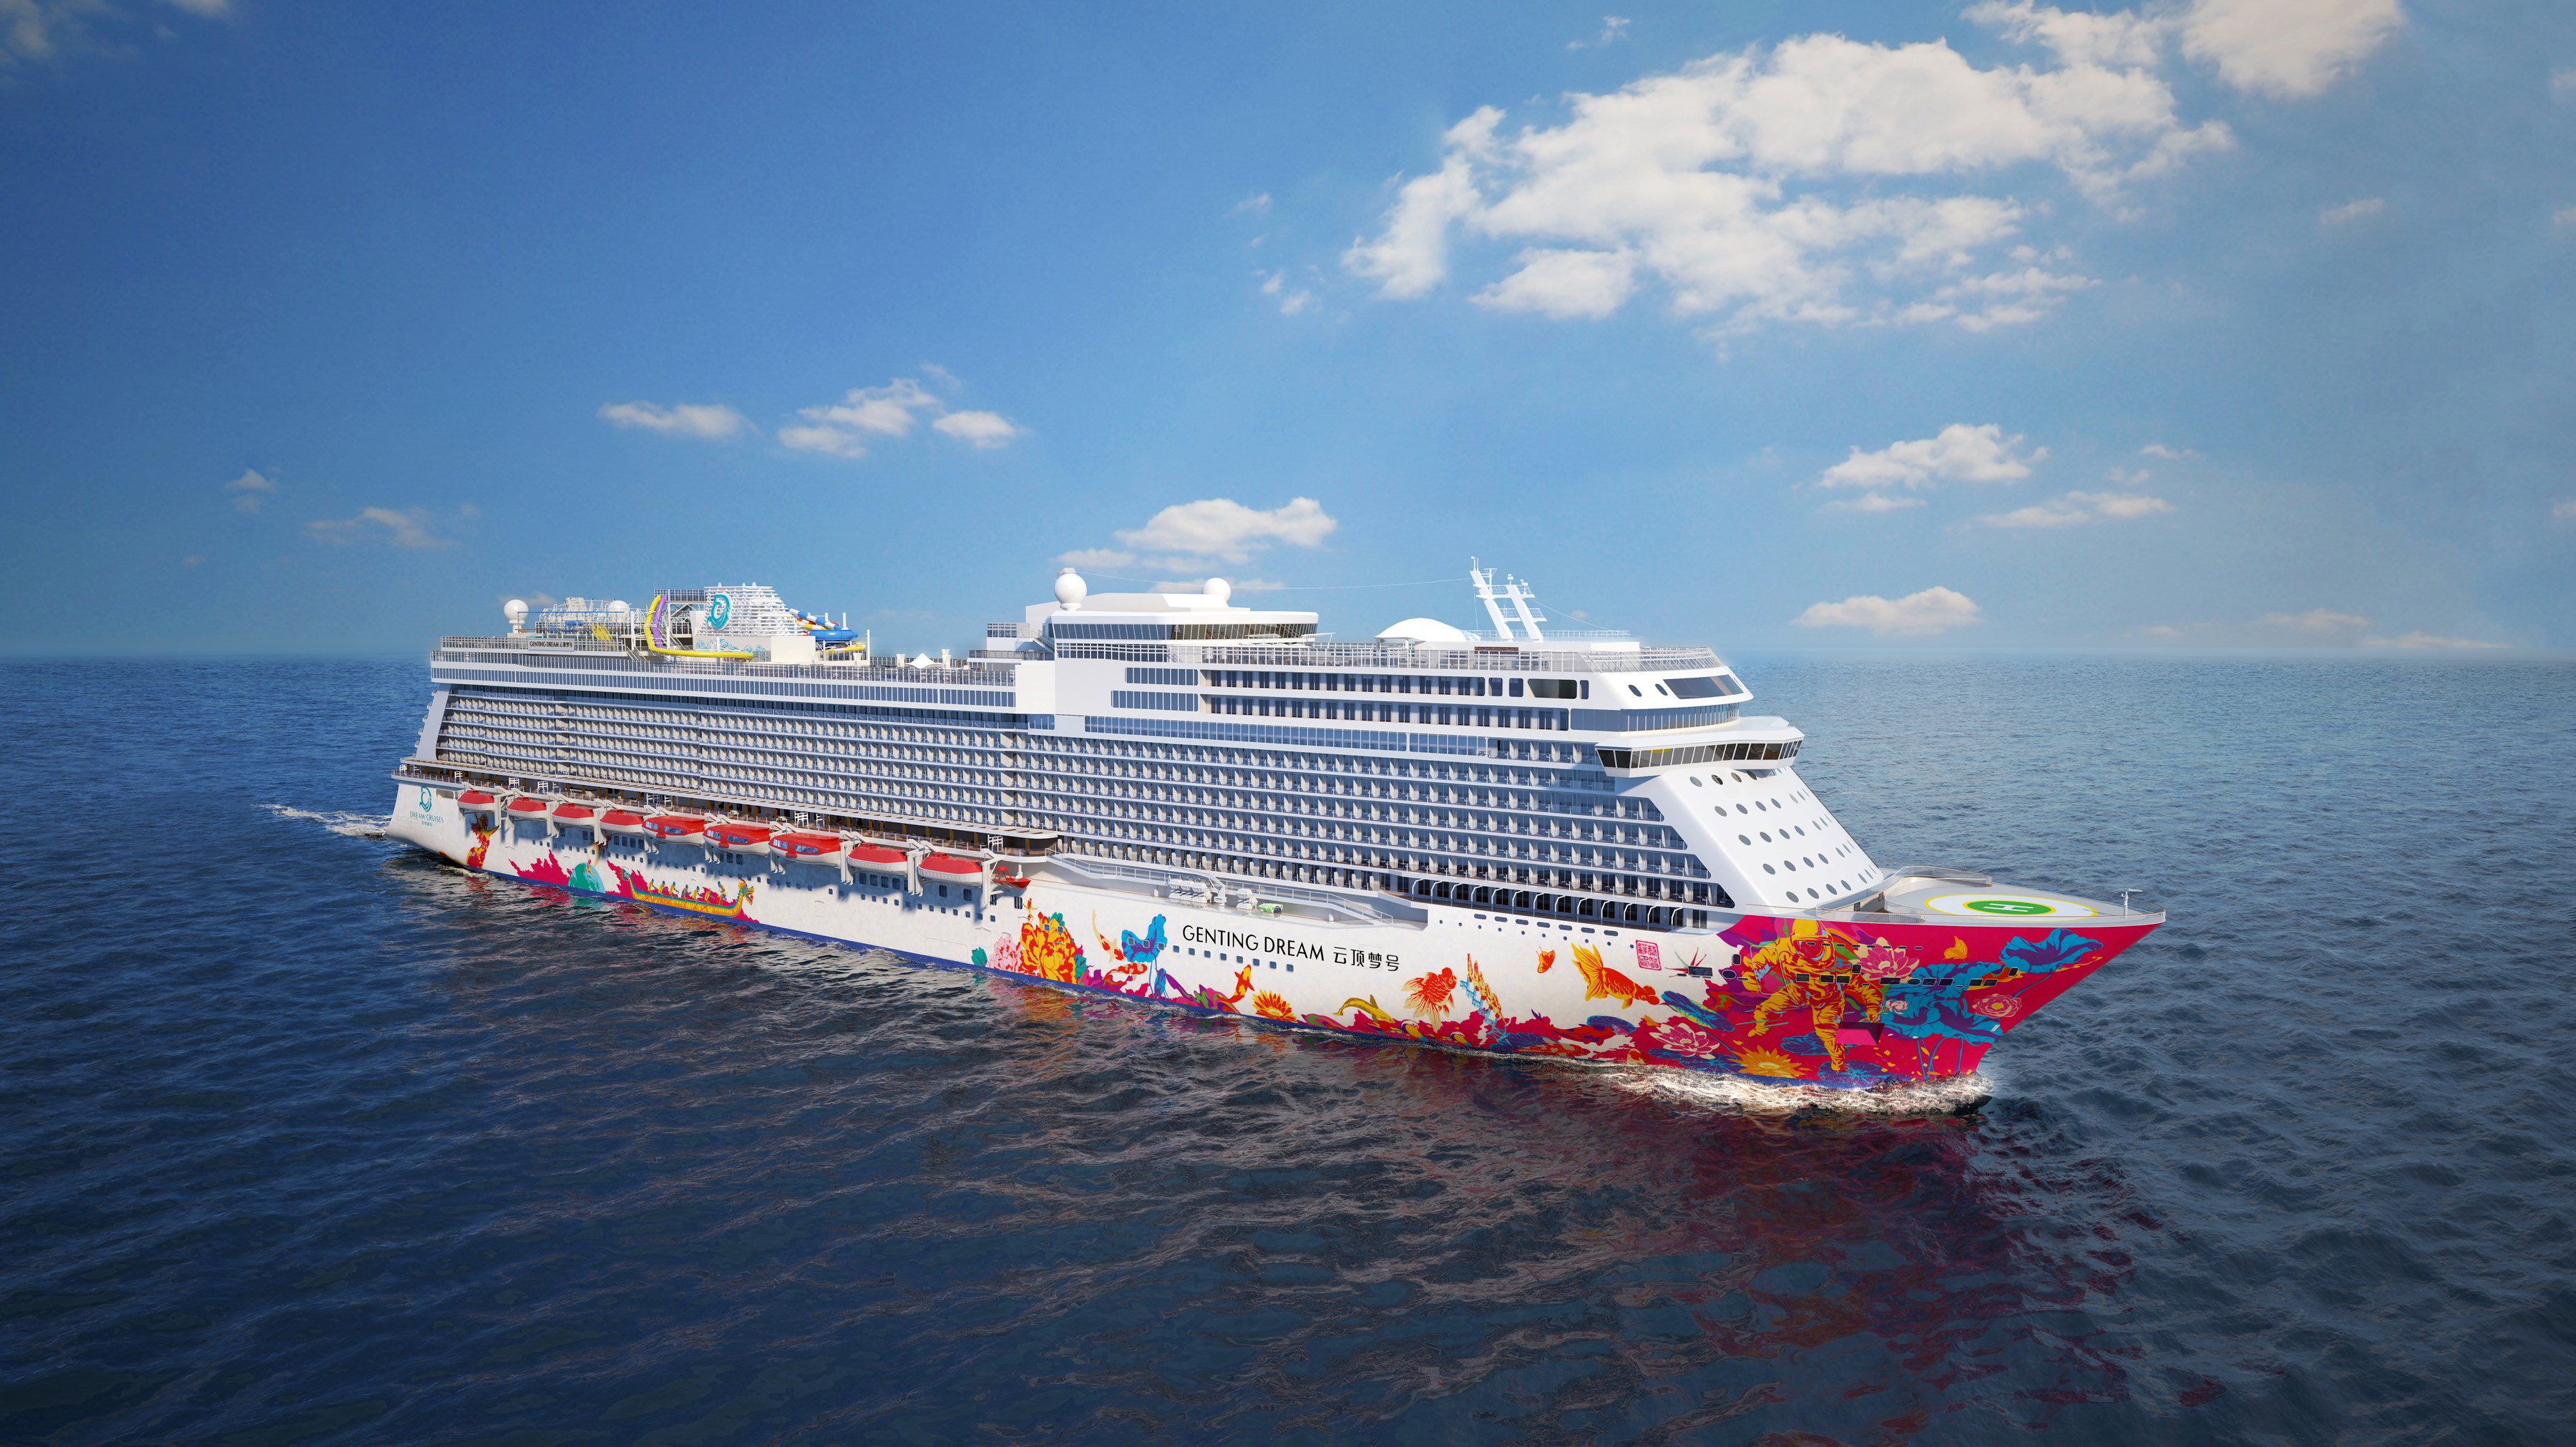 Dream Cruises, the first Asian luxury cruise line, has launched in the